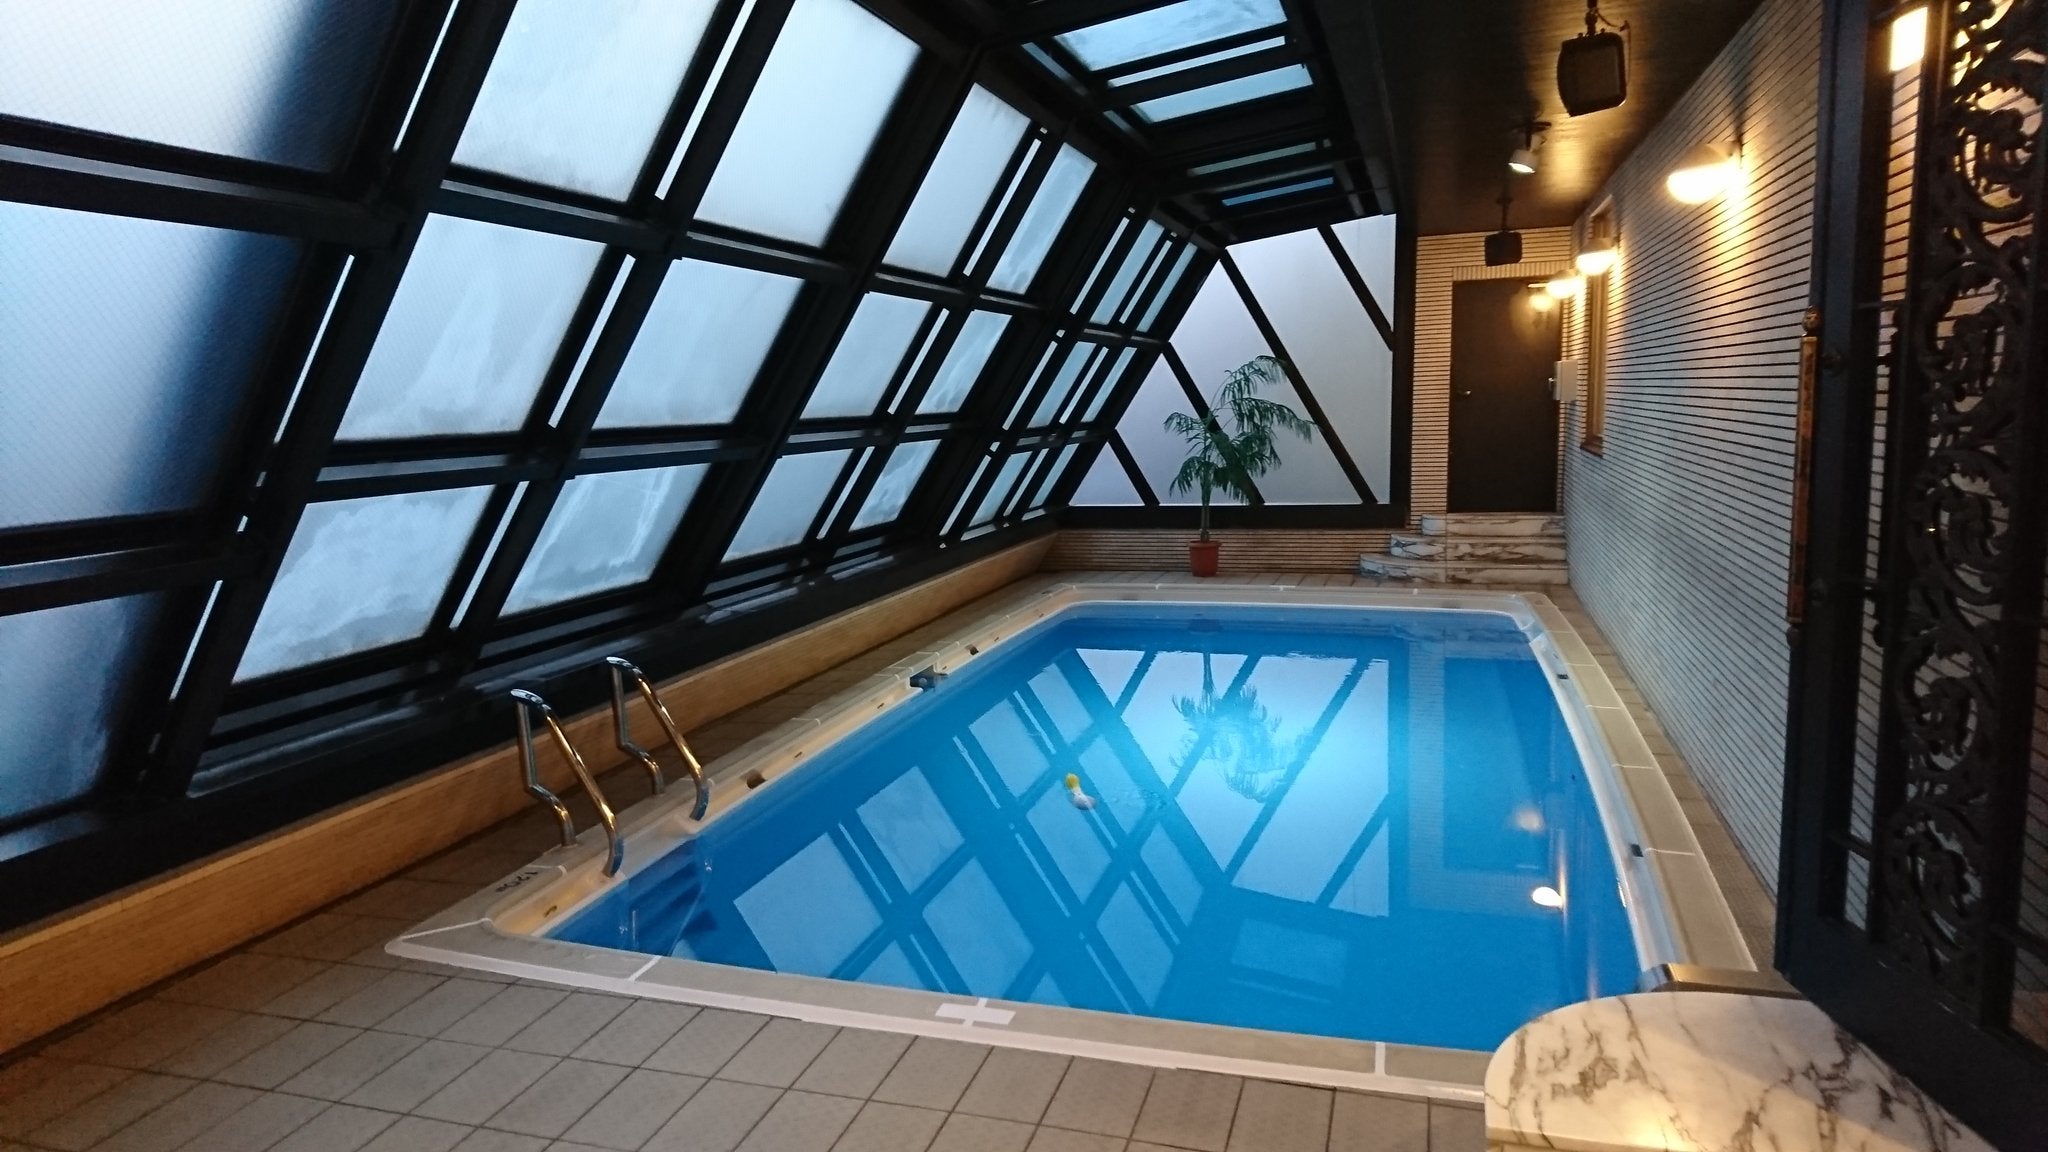 The Most Infamous Swimming Pool In Japanese Pornography